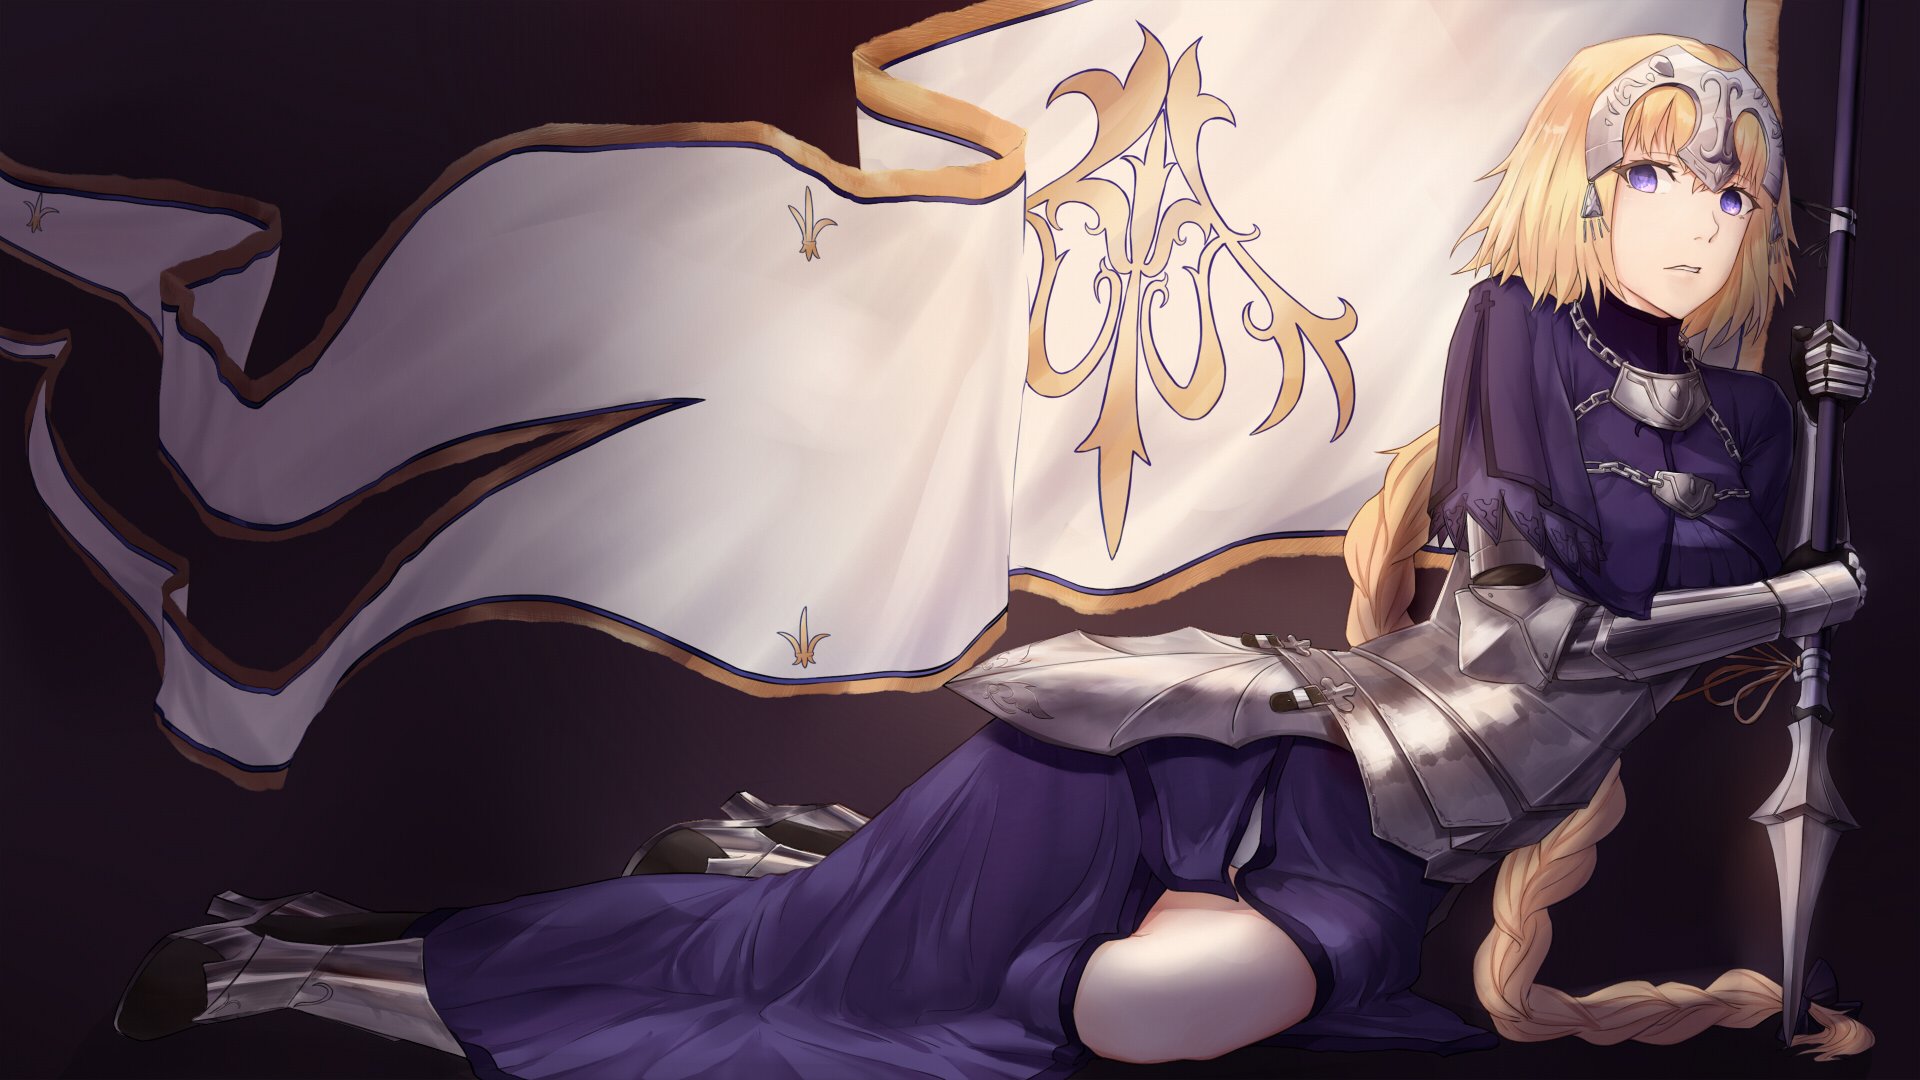 Wallpaper, Fate Series, Fate Apocrypha, anime girls, blonde, Ruler Fate Apocrypha 1920x1080